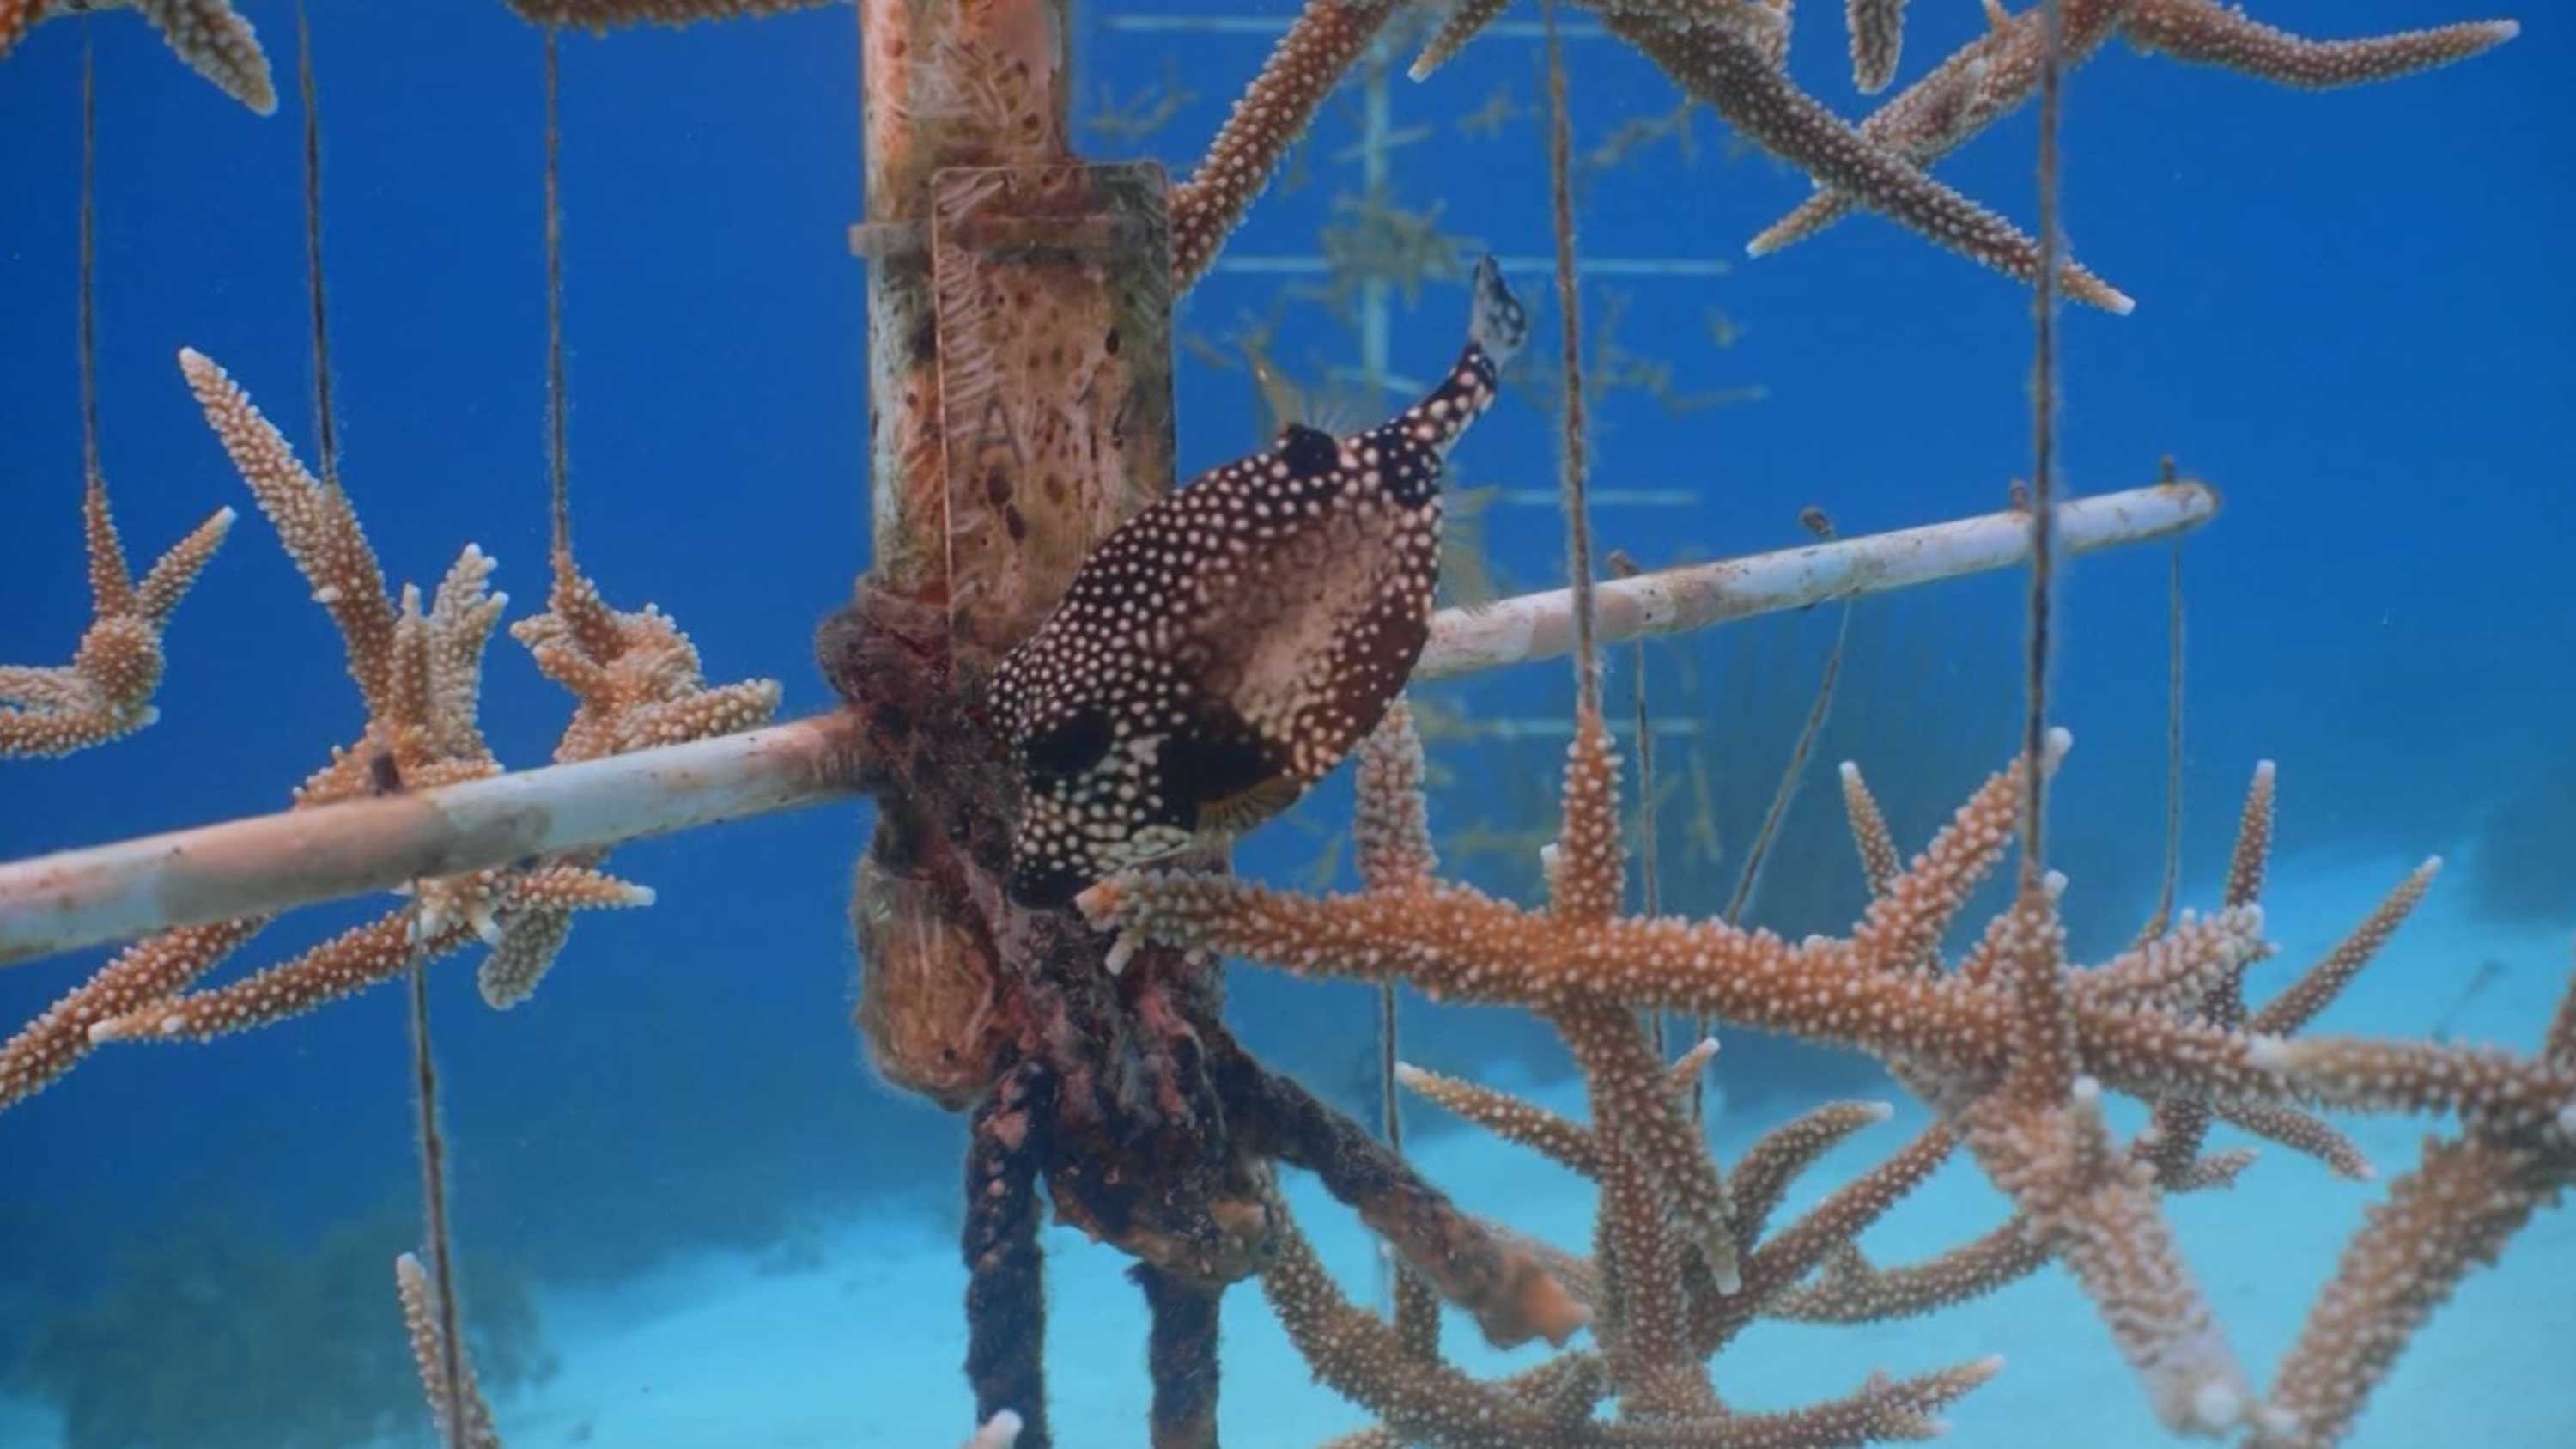 On this Caribbean island, near Venezuela, there is an underwater nursery for breeding corals